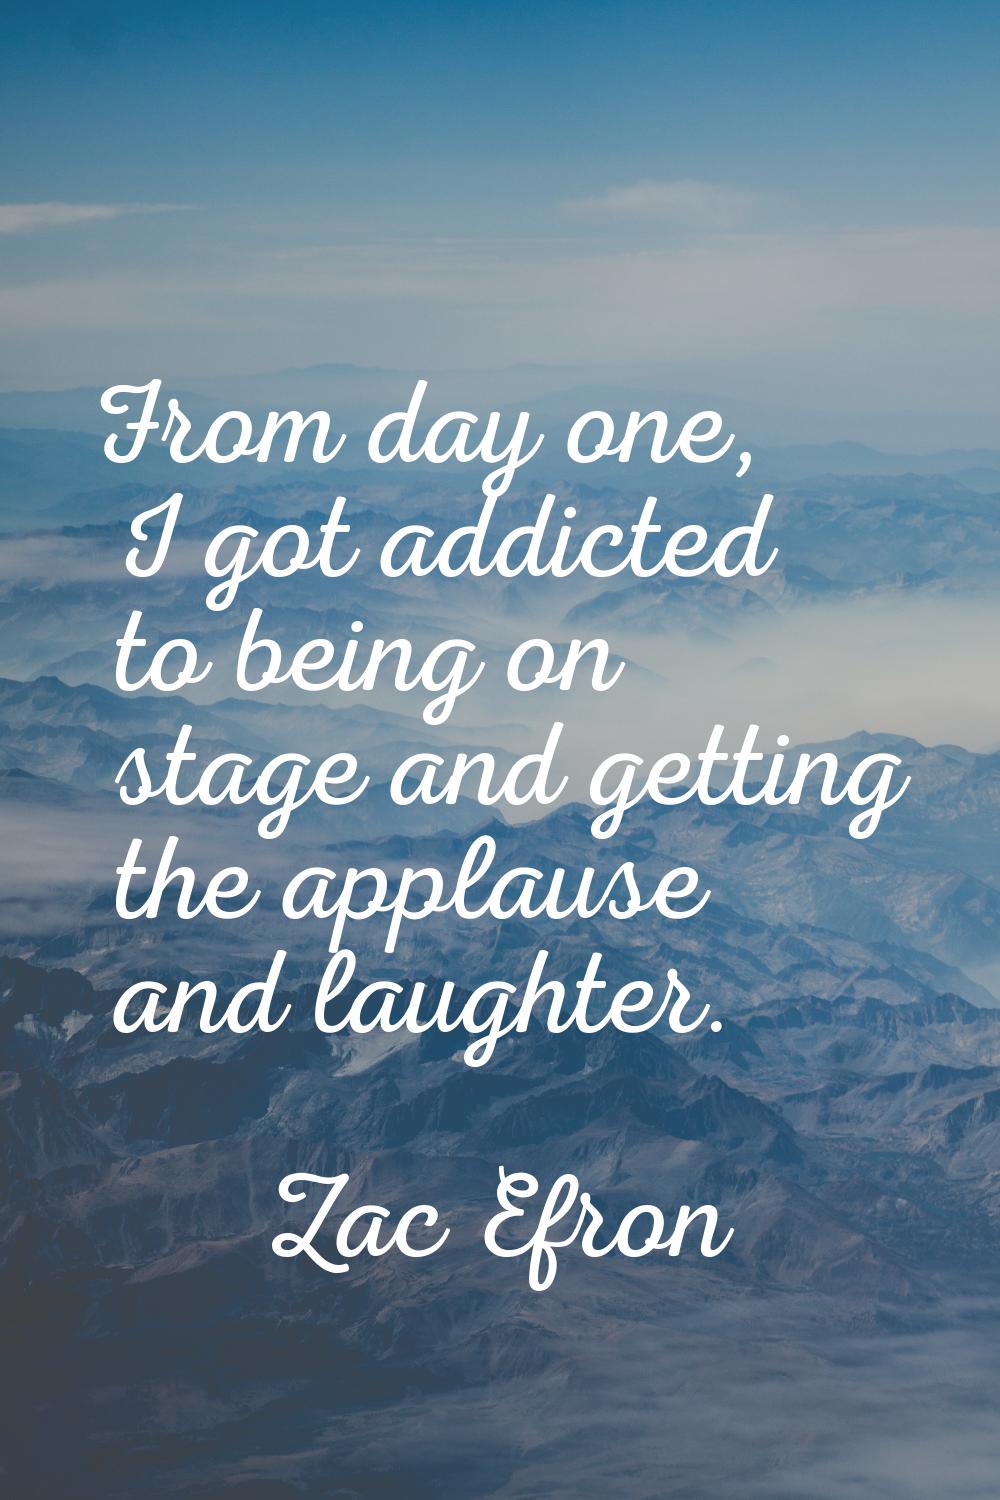 From day one, I got addicted to being on stage and getting the applause and laughter.